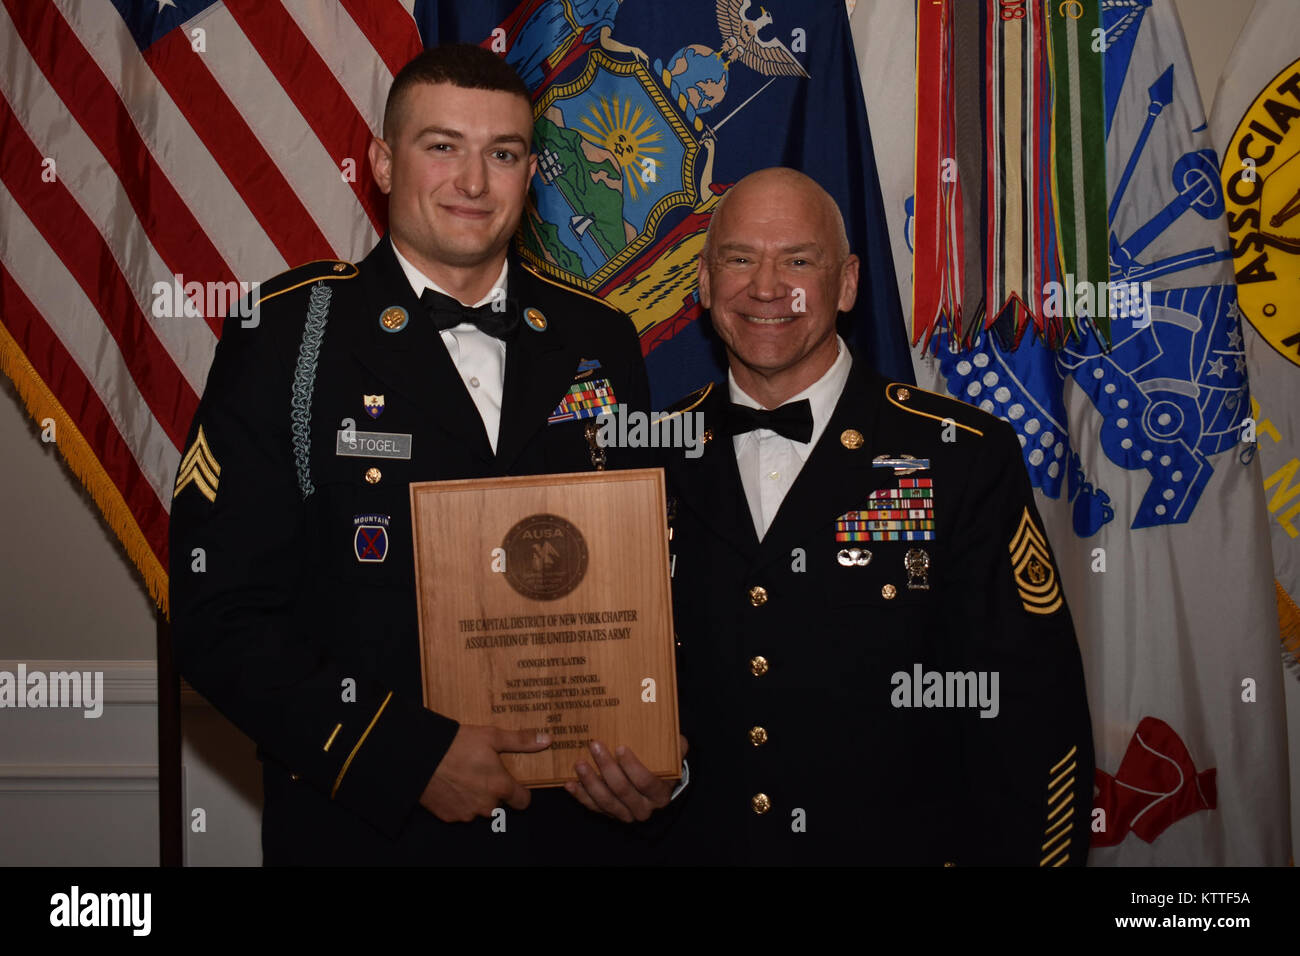 N.Y. Army National Guard Soldier Sgt. Mitchell Stogel, assigned to Scout platoon, 1st battalion, 69th infantry, receives the Non-Commisioned Officer of the Year award next to the N.Y. State Command Sgt. Maj. David Piwowarski, at the Association of the United States Army’s(AUSA) Soldier Recognition dinner, in Albany, N.Y., Sept. 23, 2017. Stogel received this award for his achievements as an NCO in the N.Y. Army National Guard. (N.Y. Army National Guard photo by Pfc. Andrew Valenza) Stock Photo